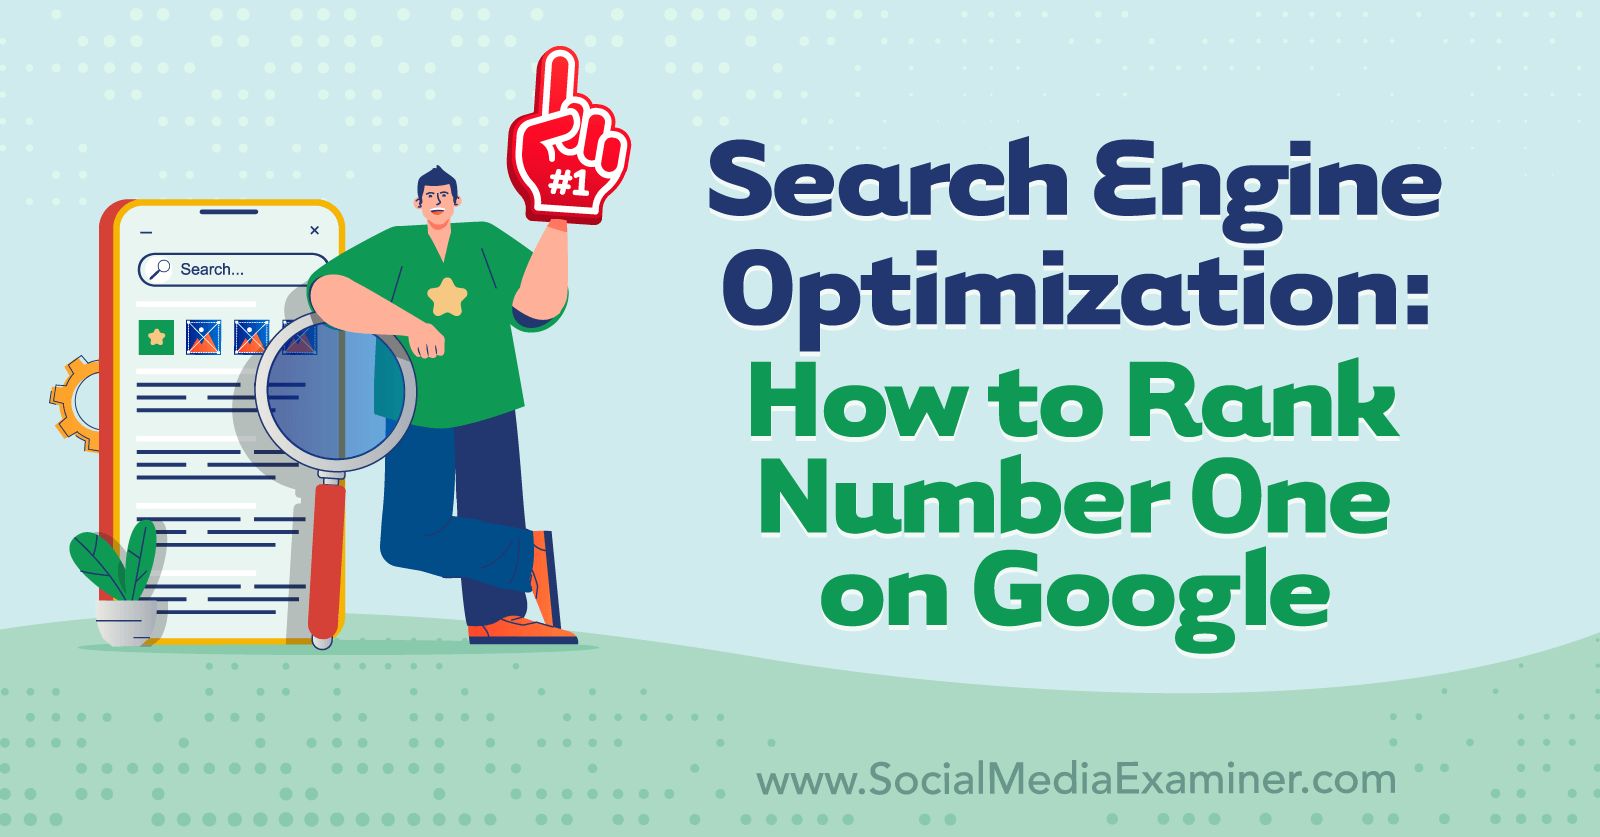 Search Engine Optimization: How to Rank Number One on Google-Social Media Examiner